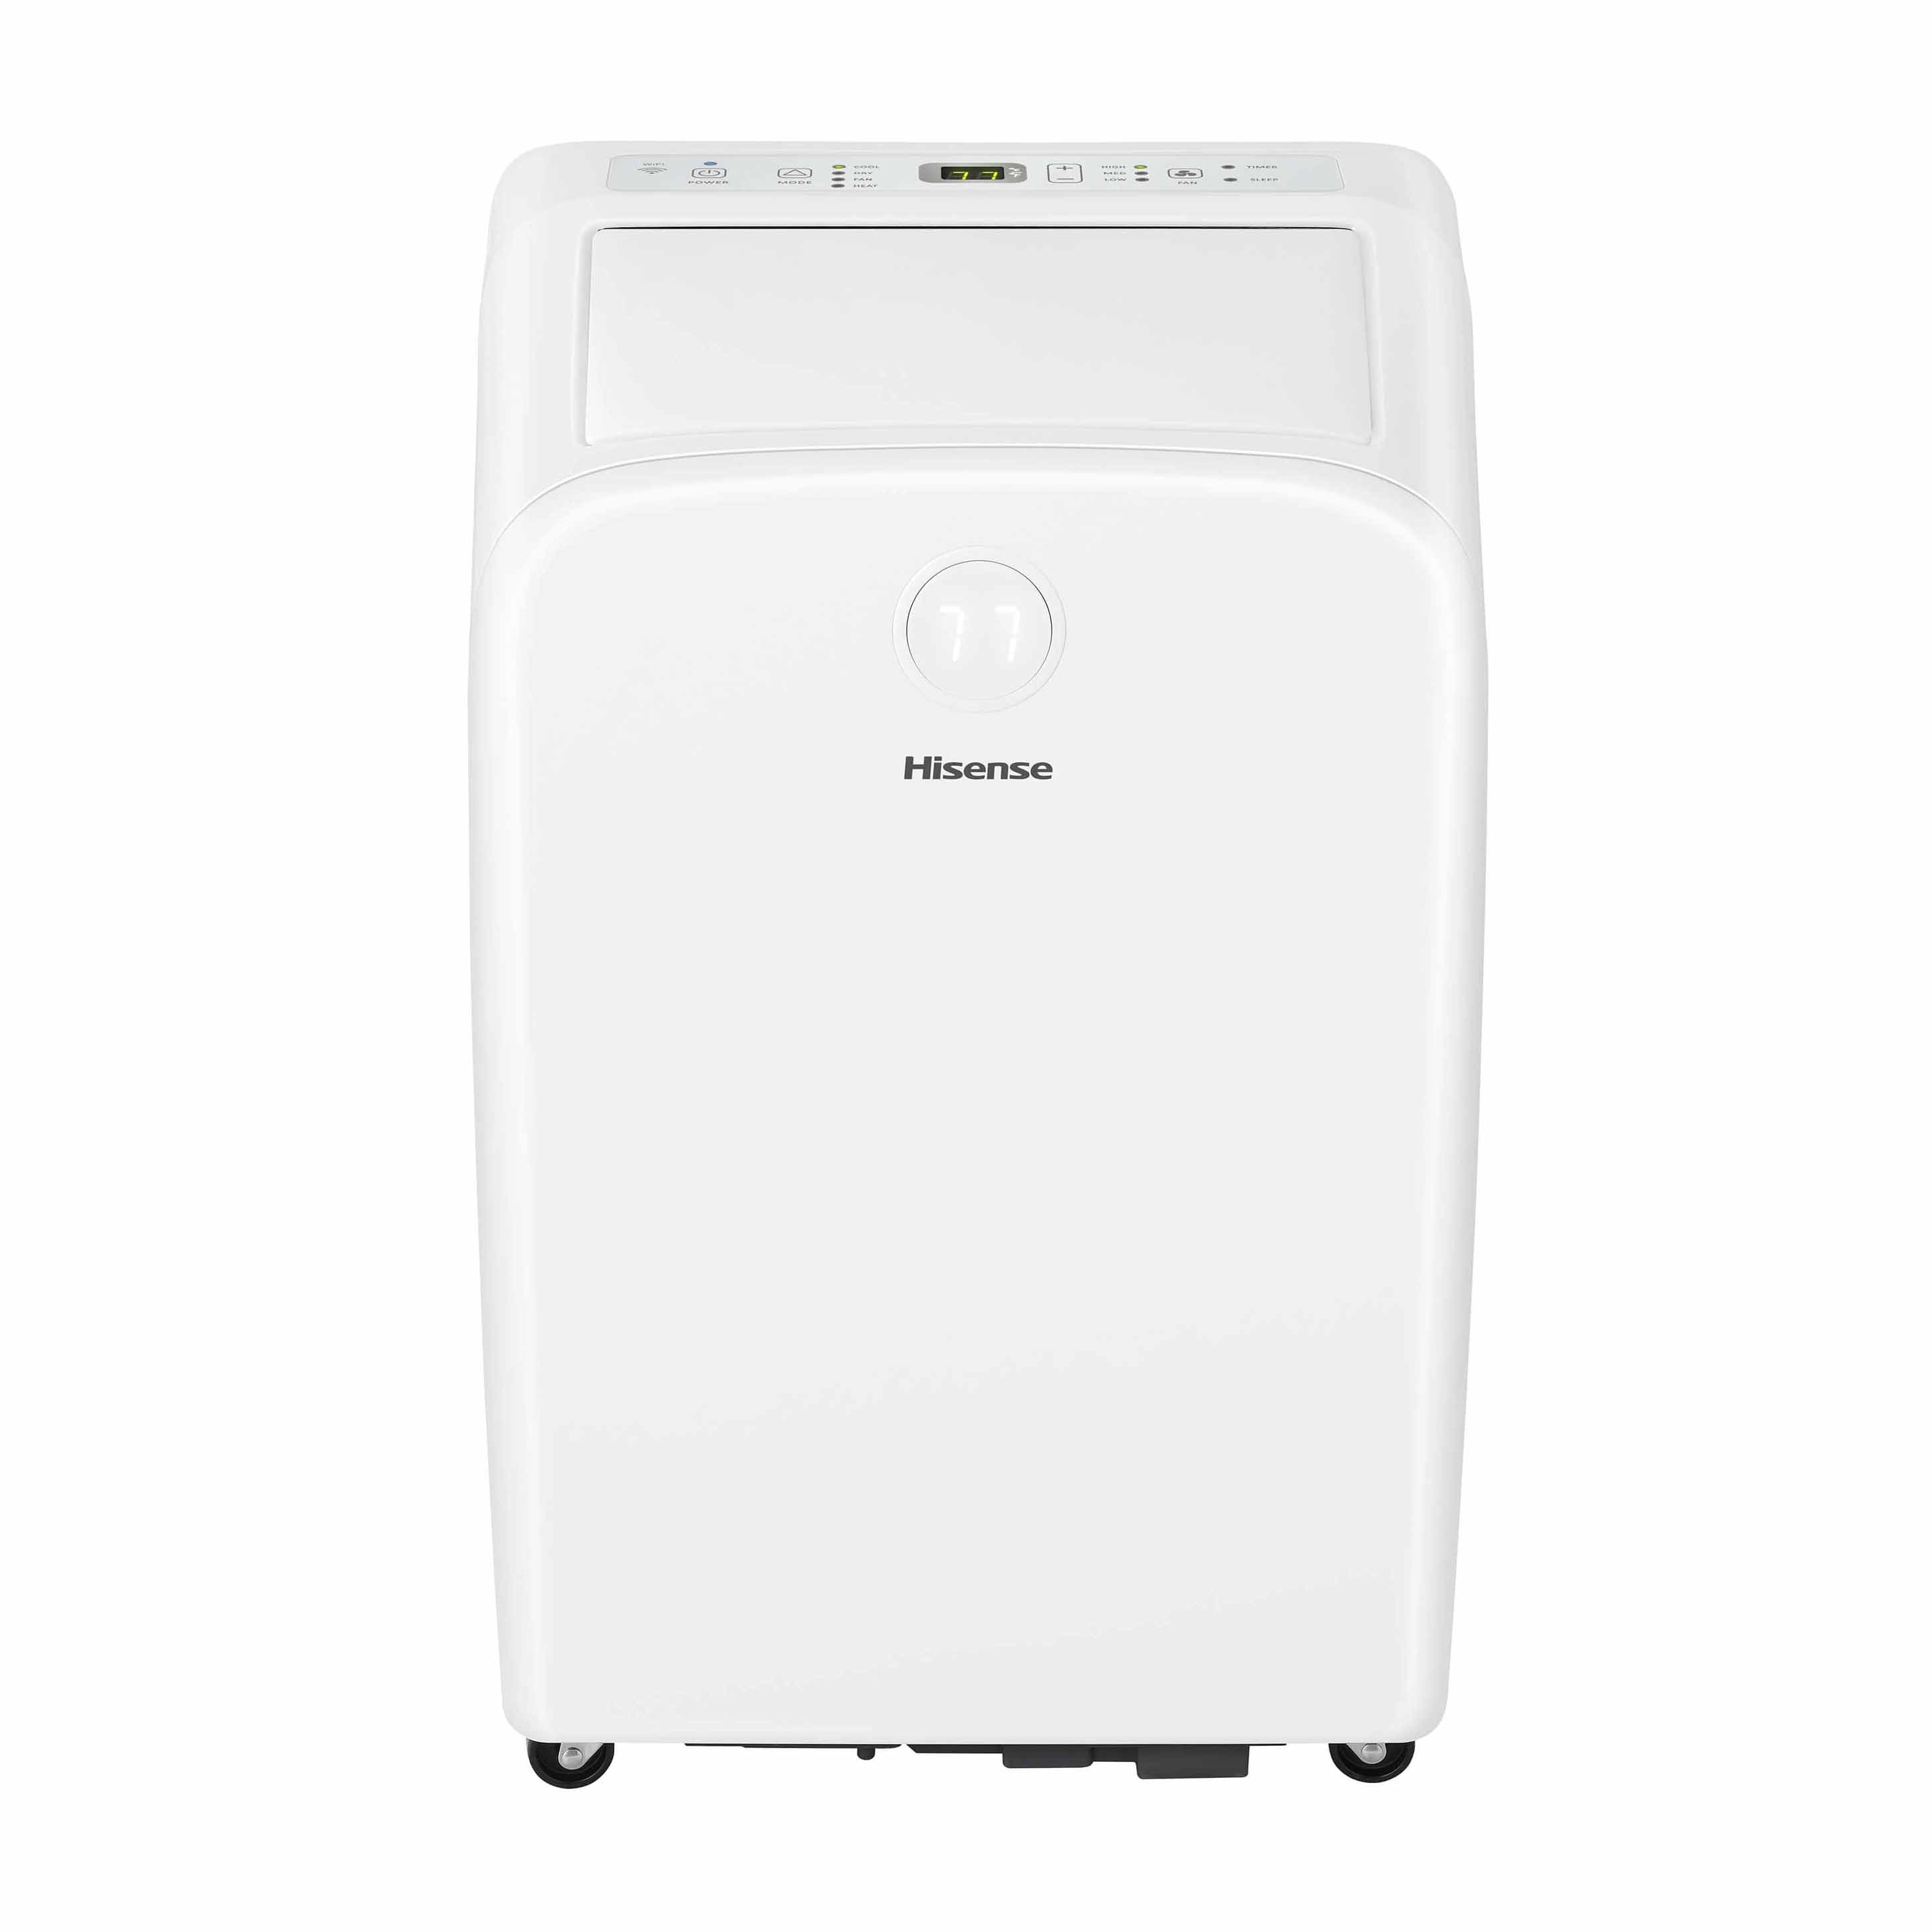 Hisense 550 sq.ft Built-in Heat and WiFi 8,000 BTU Dual Hose Portable Air Conditioner - Certified Refurbished